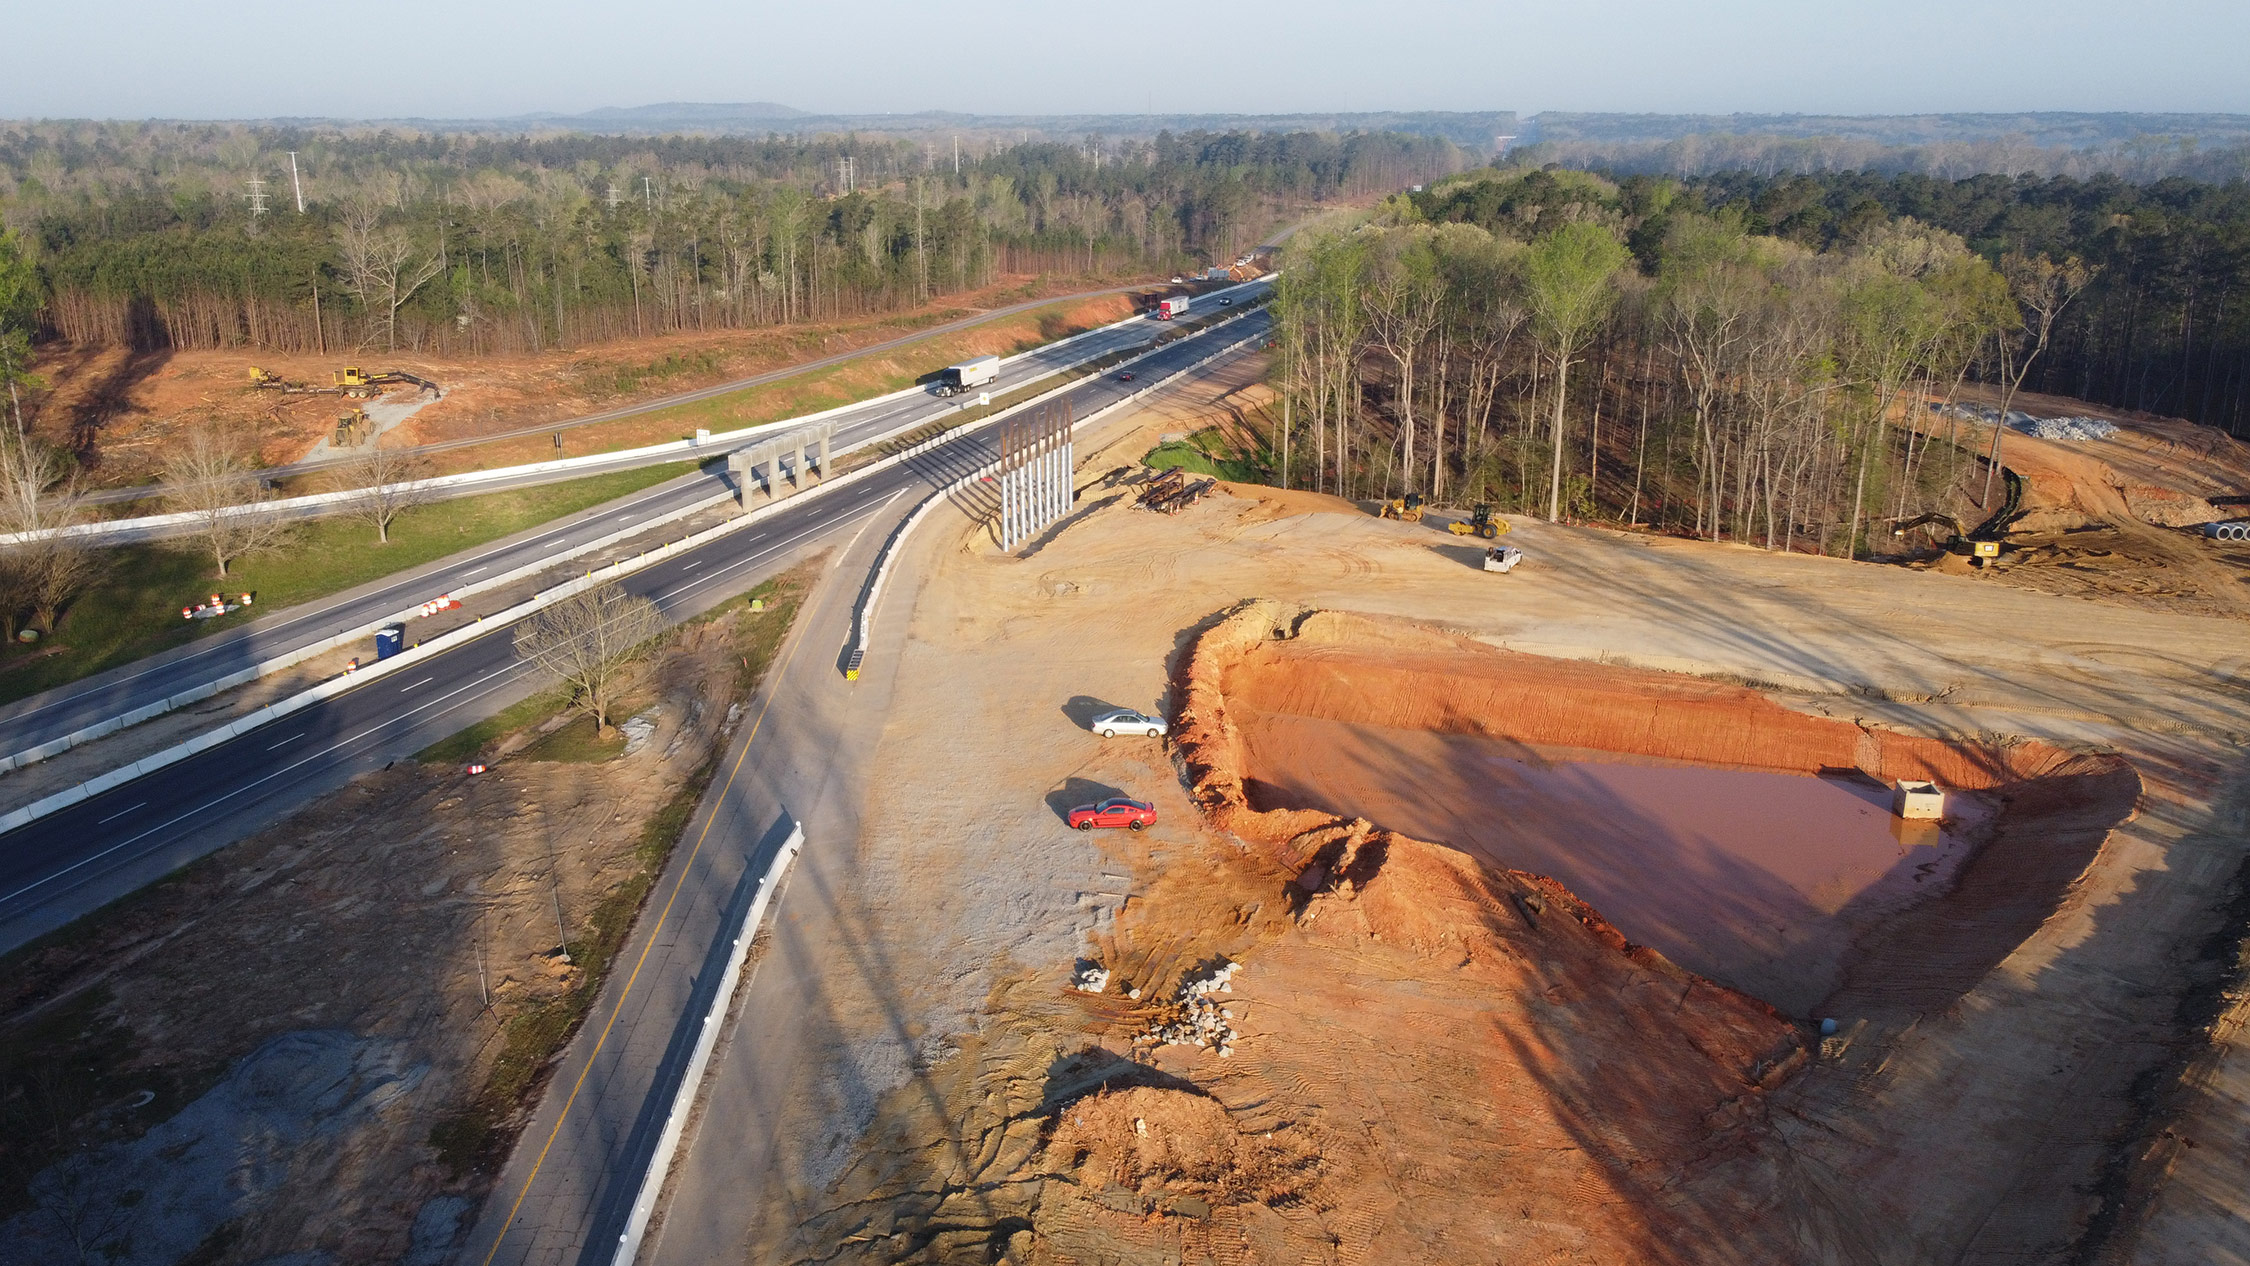 Work on the new location for Exit 91 is underway.  This photo shows the new alignment of Columbia Avenue and the future ramps to I-26 westbound.